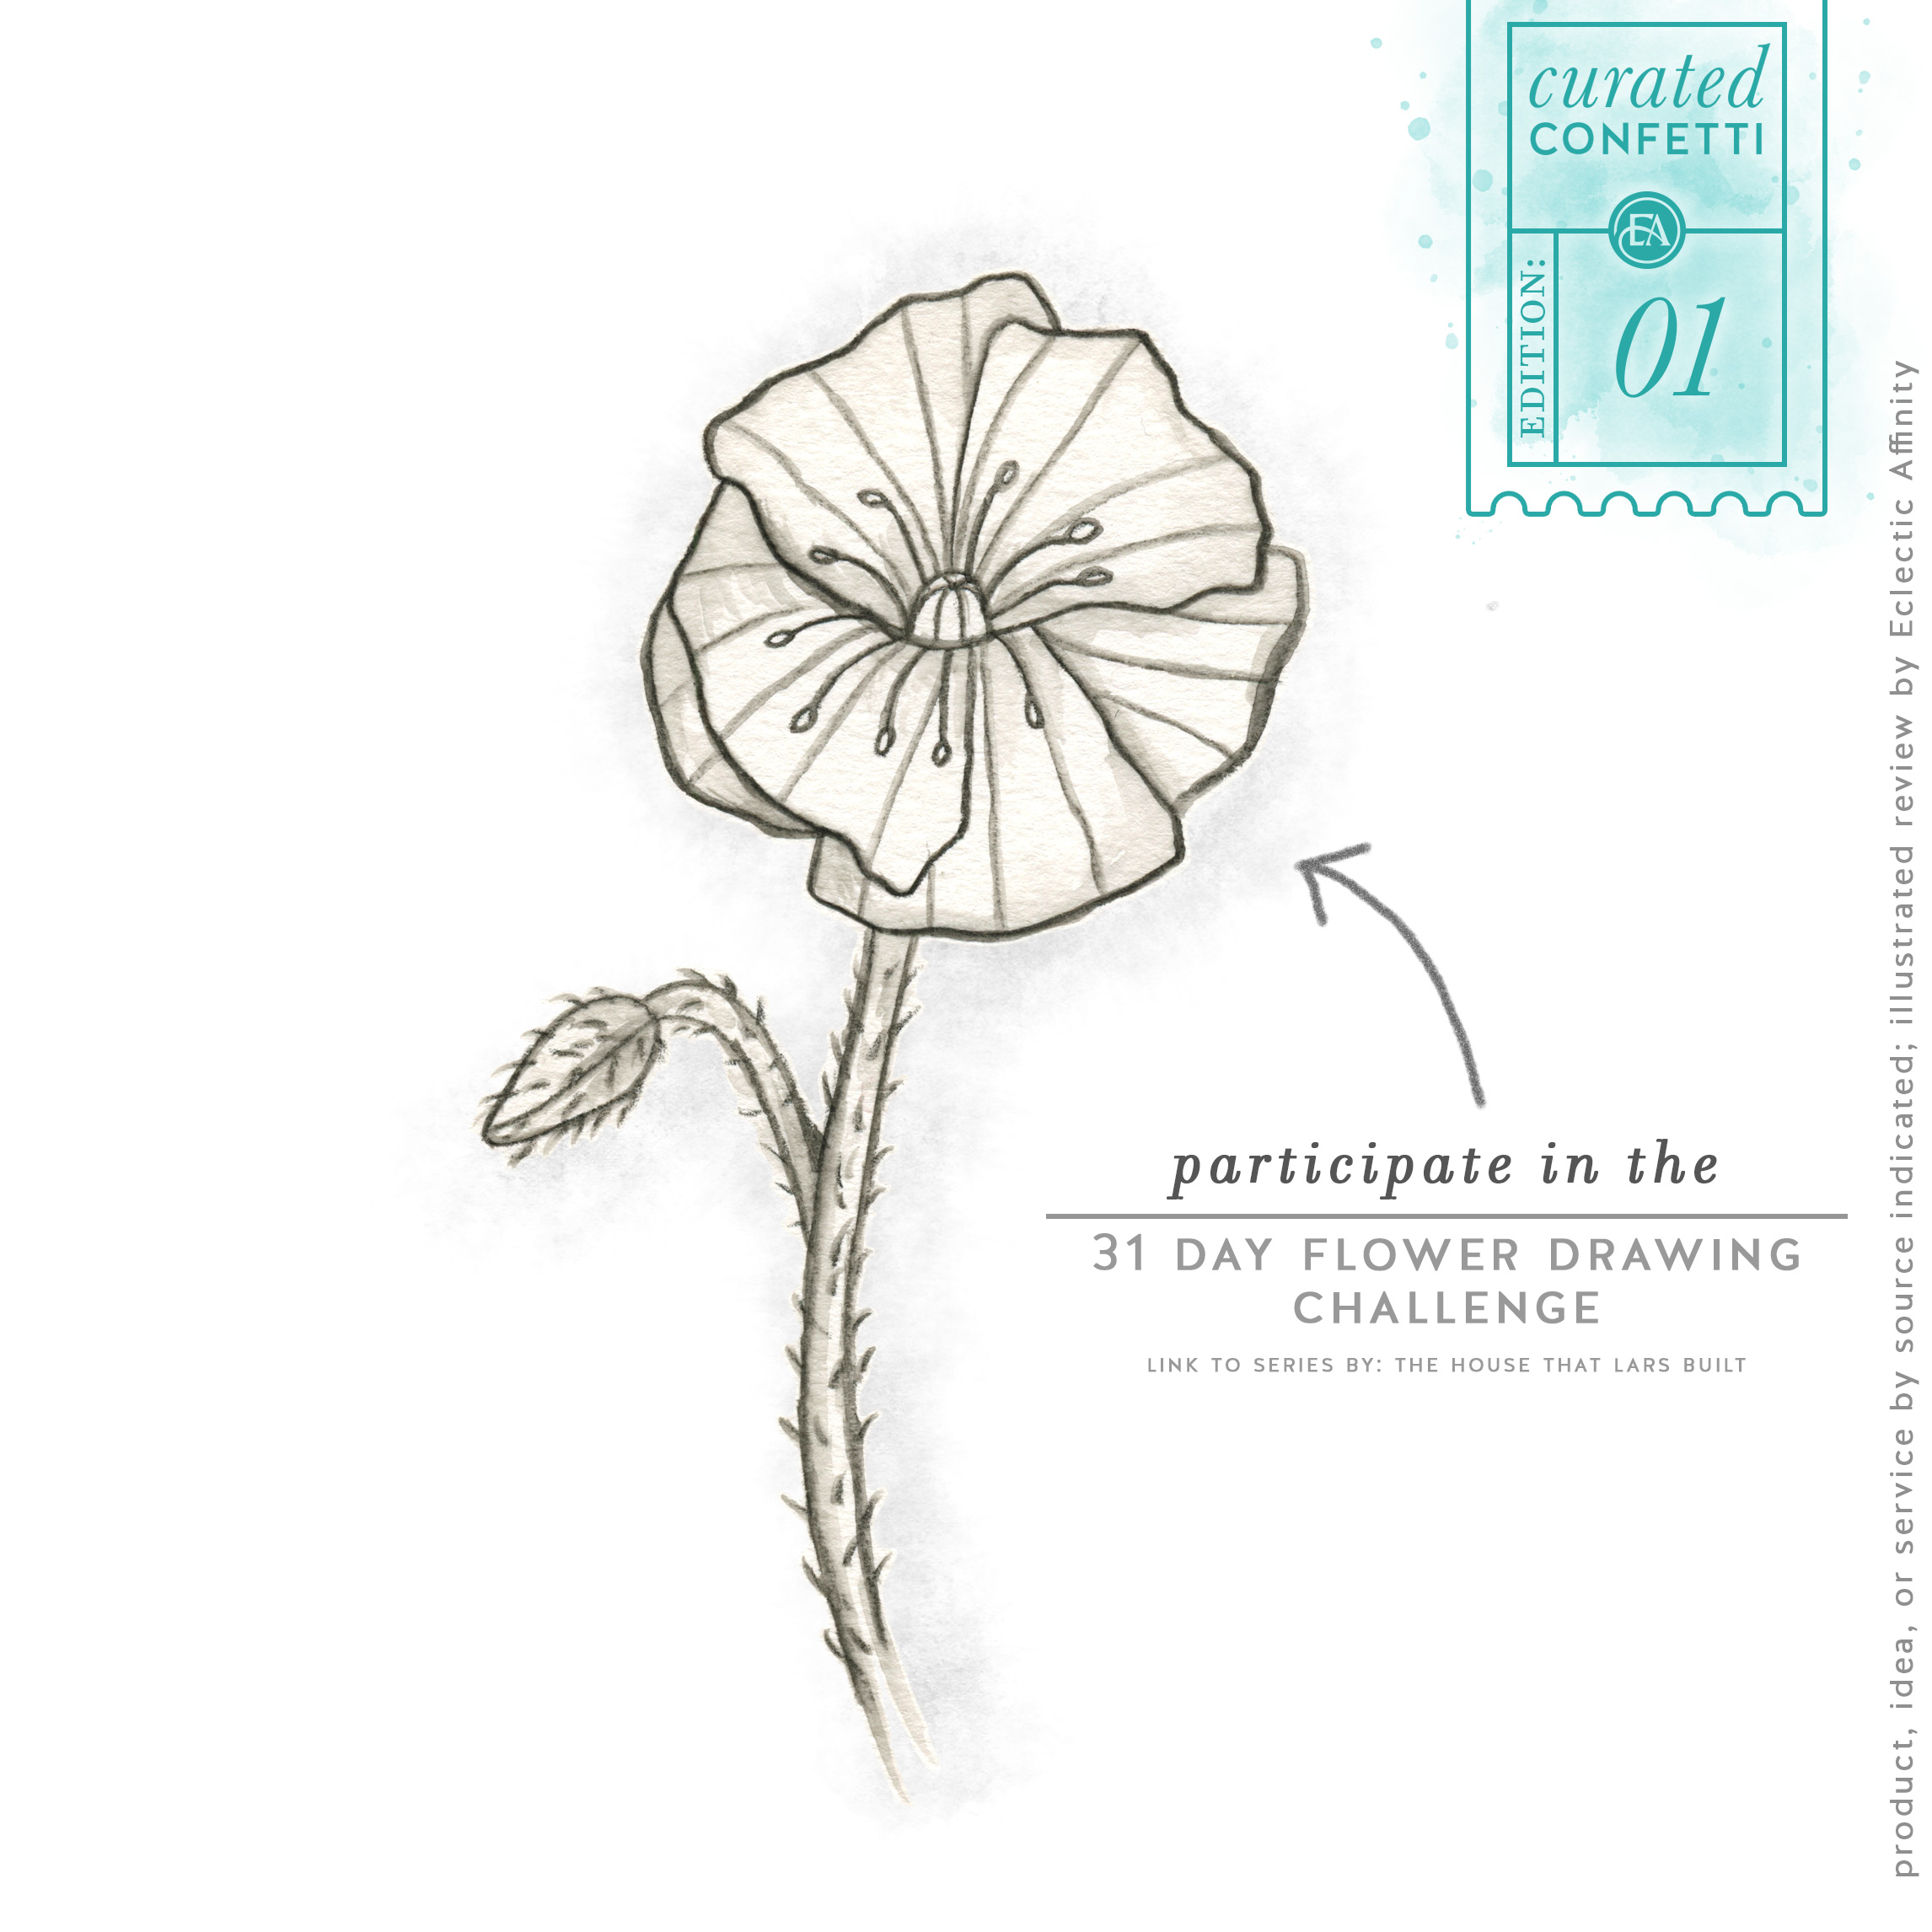 Participate in a flower drawing challenge!